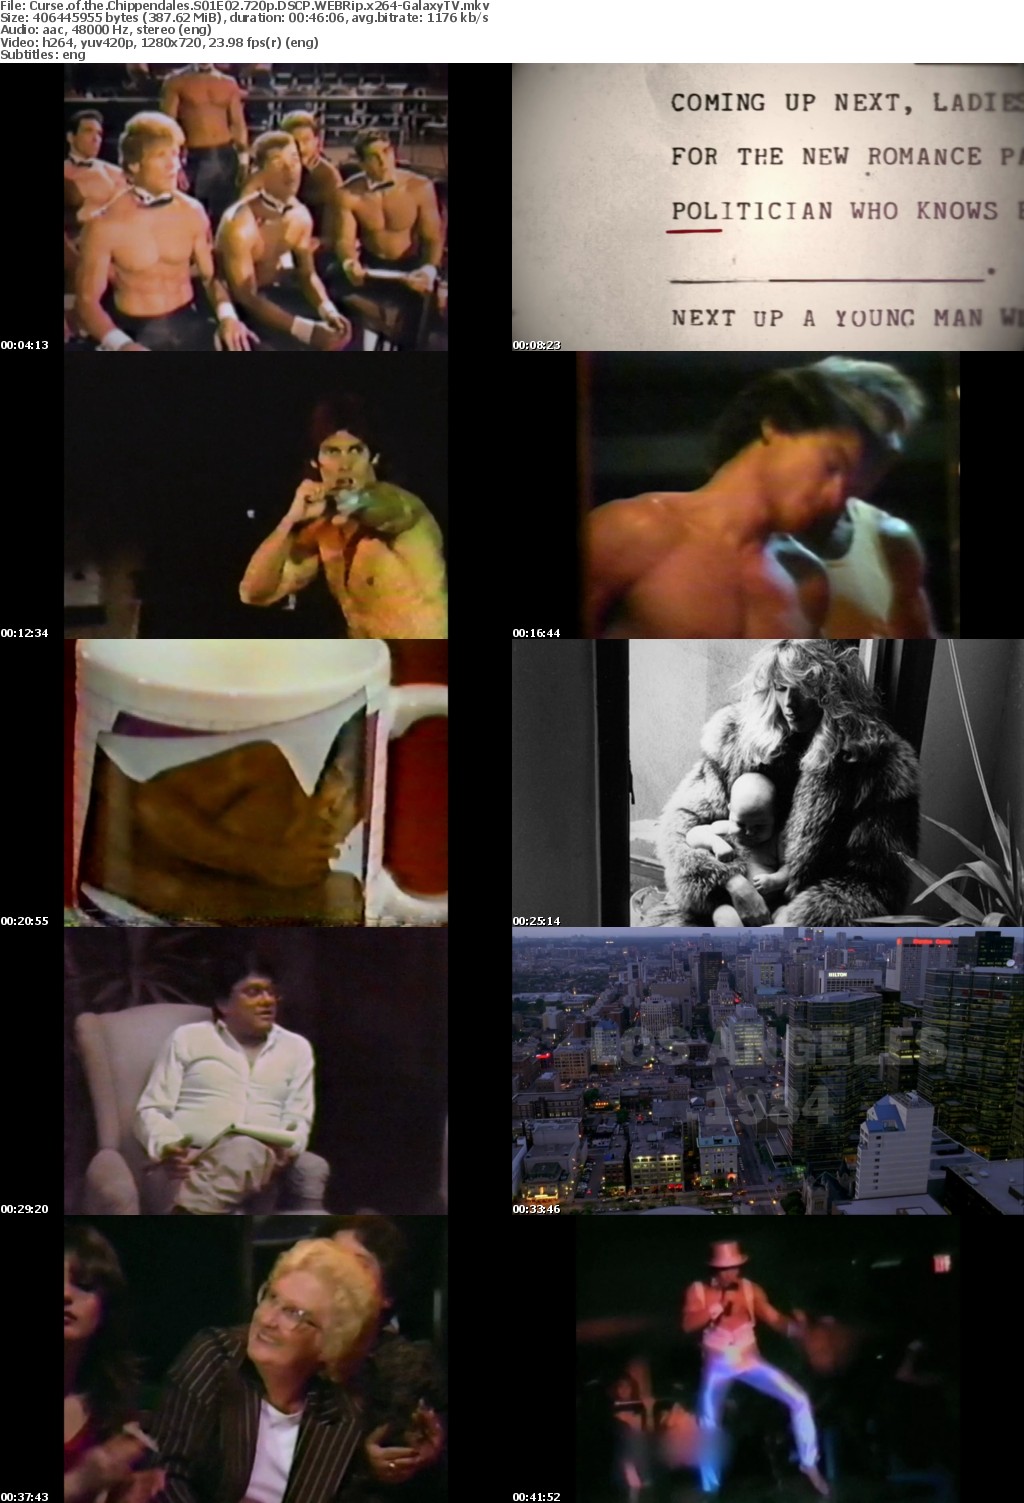 Curse of the Chippendales S01 COMPLETE 720p DSCP WEBRip x264-GalaxyTV